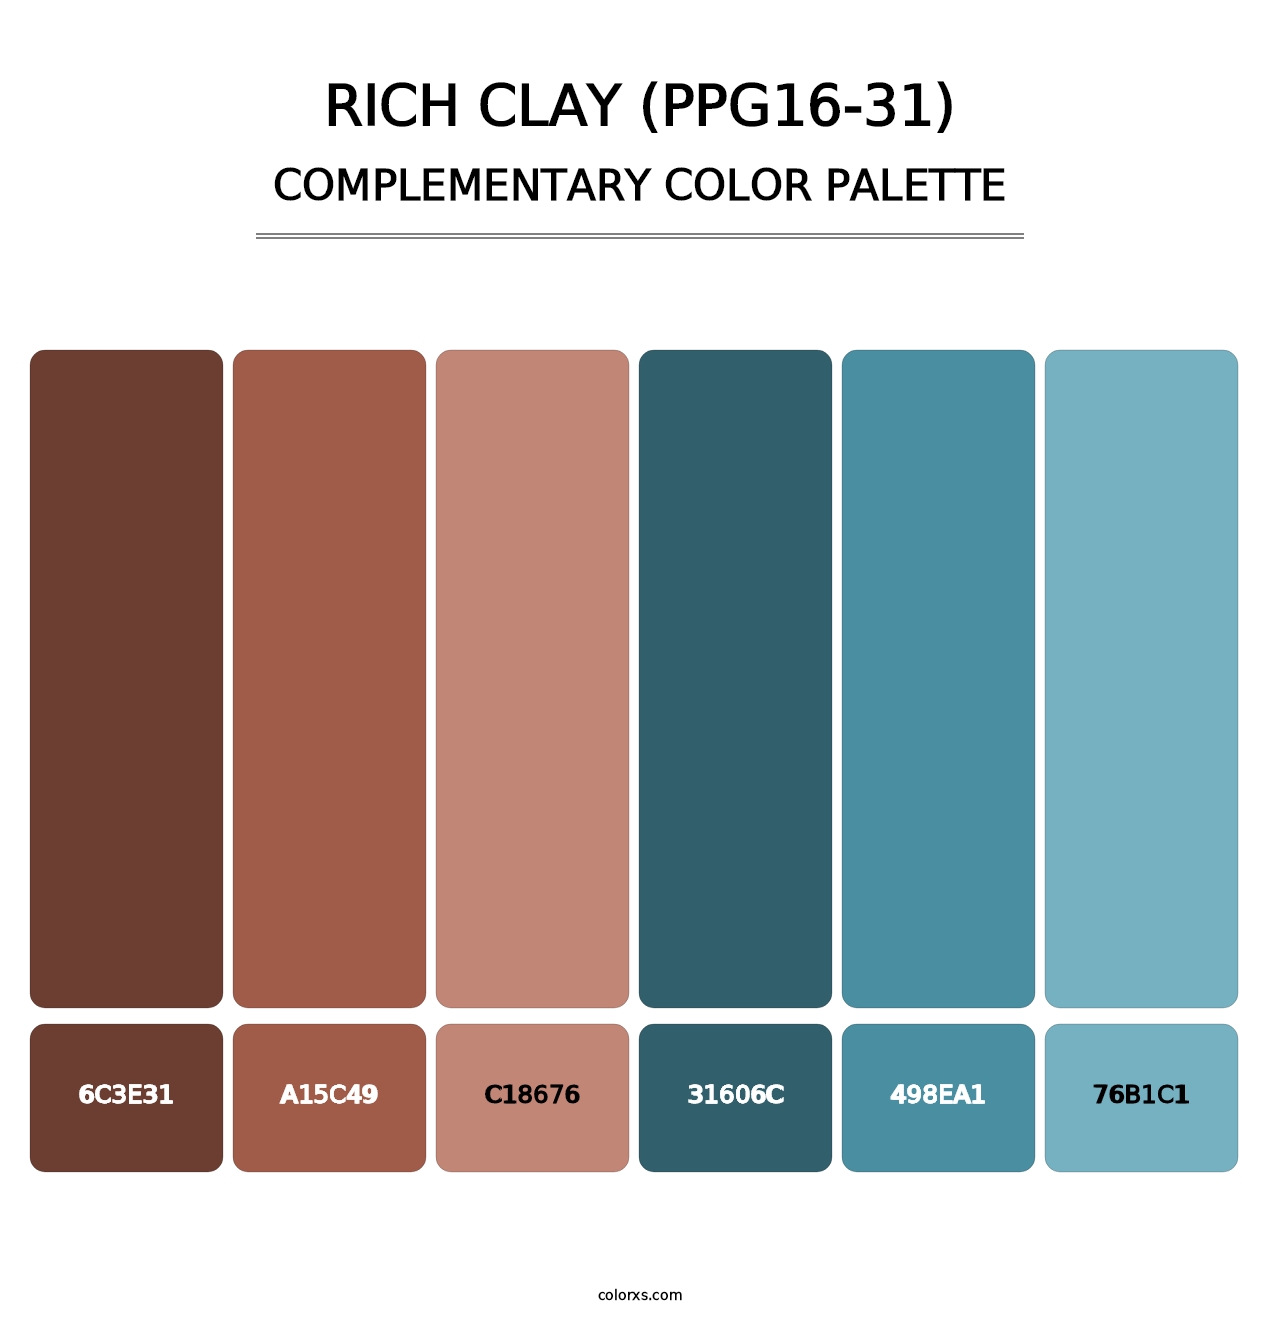 Rich Clay (PPG16-31) - Complementary Color Palette